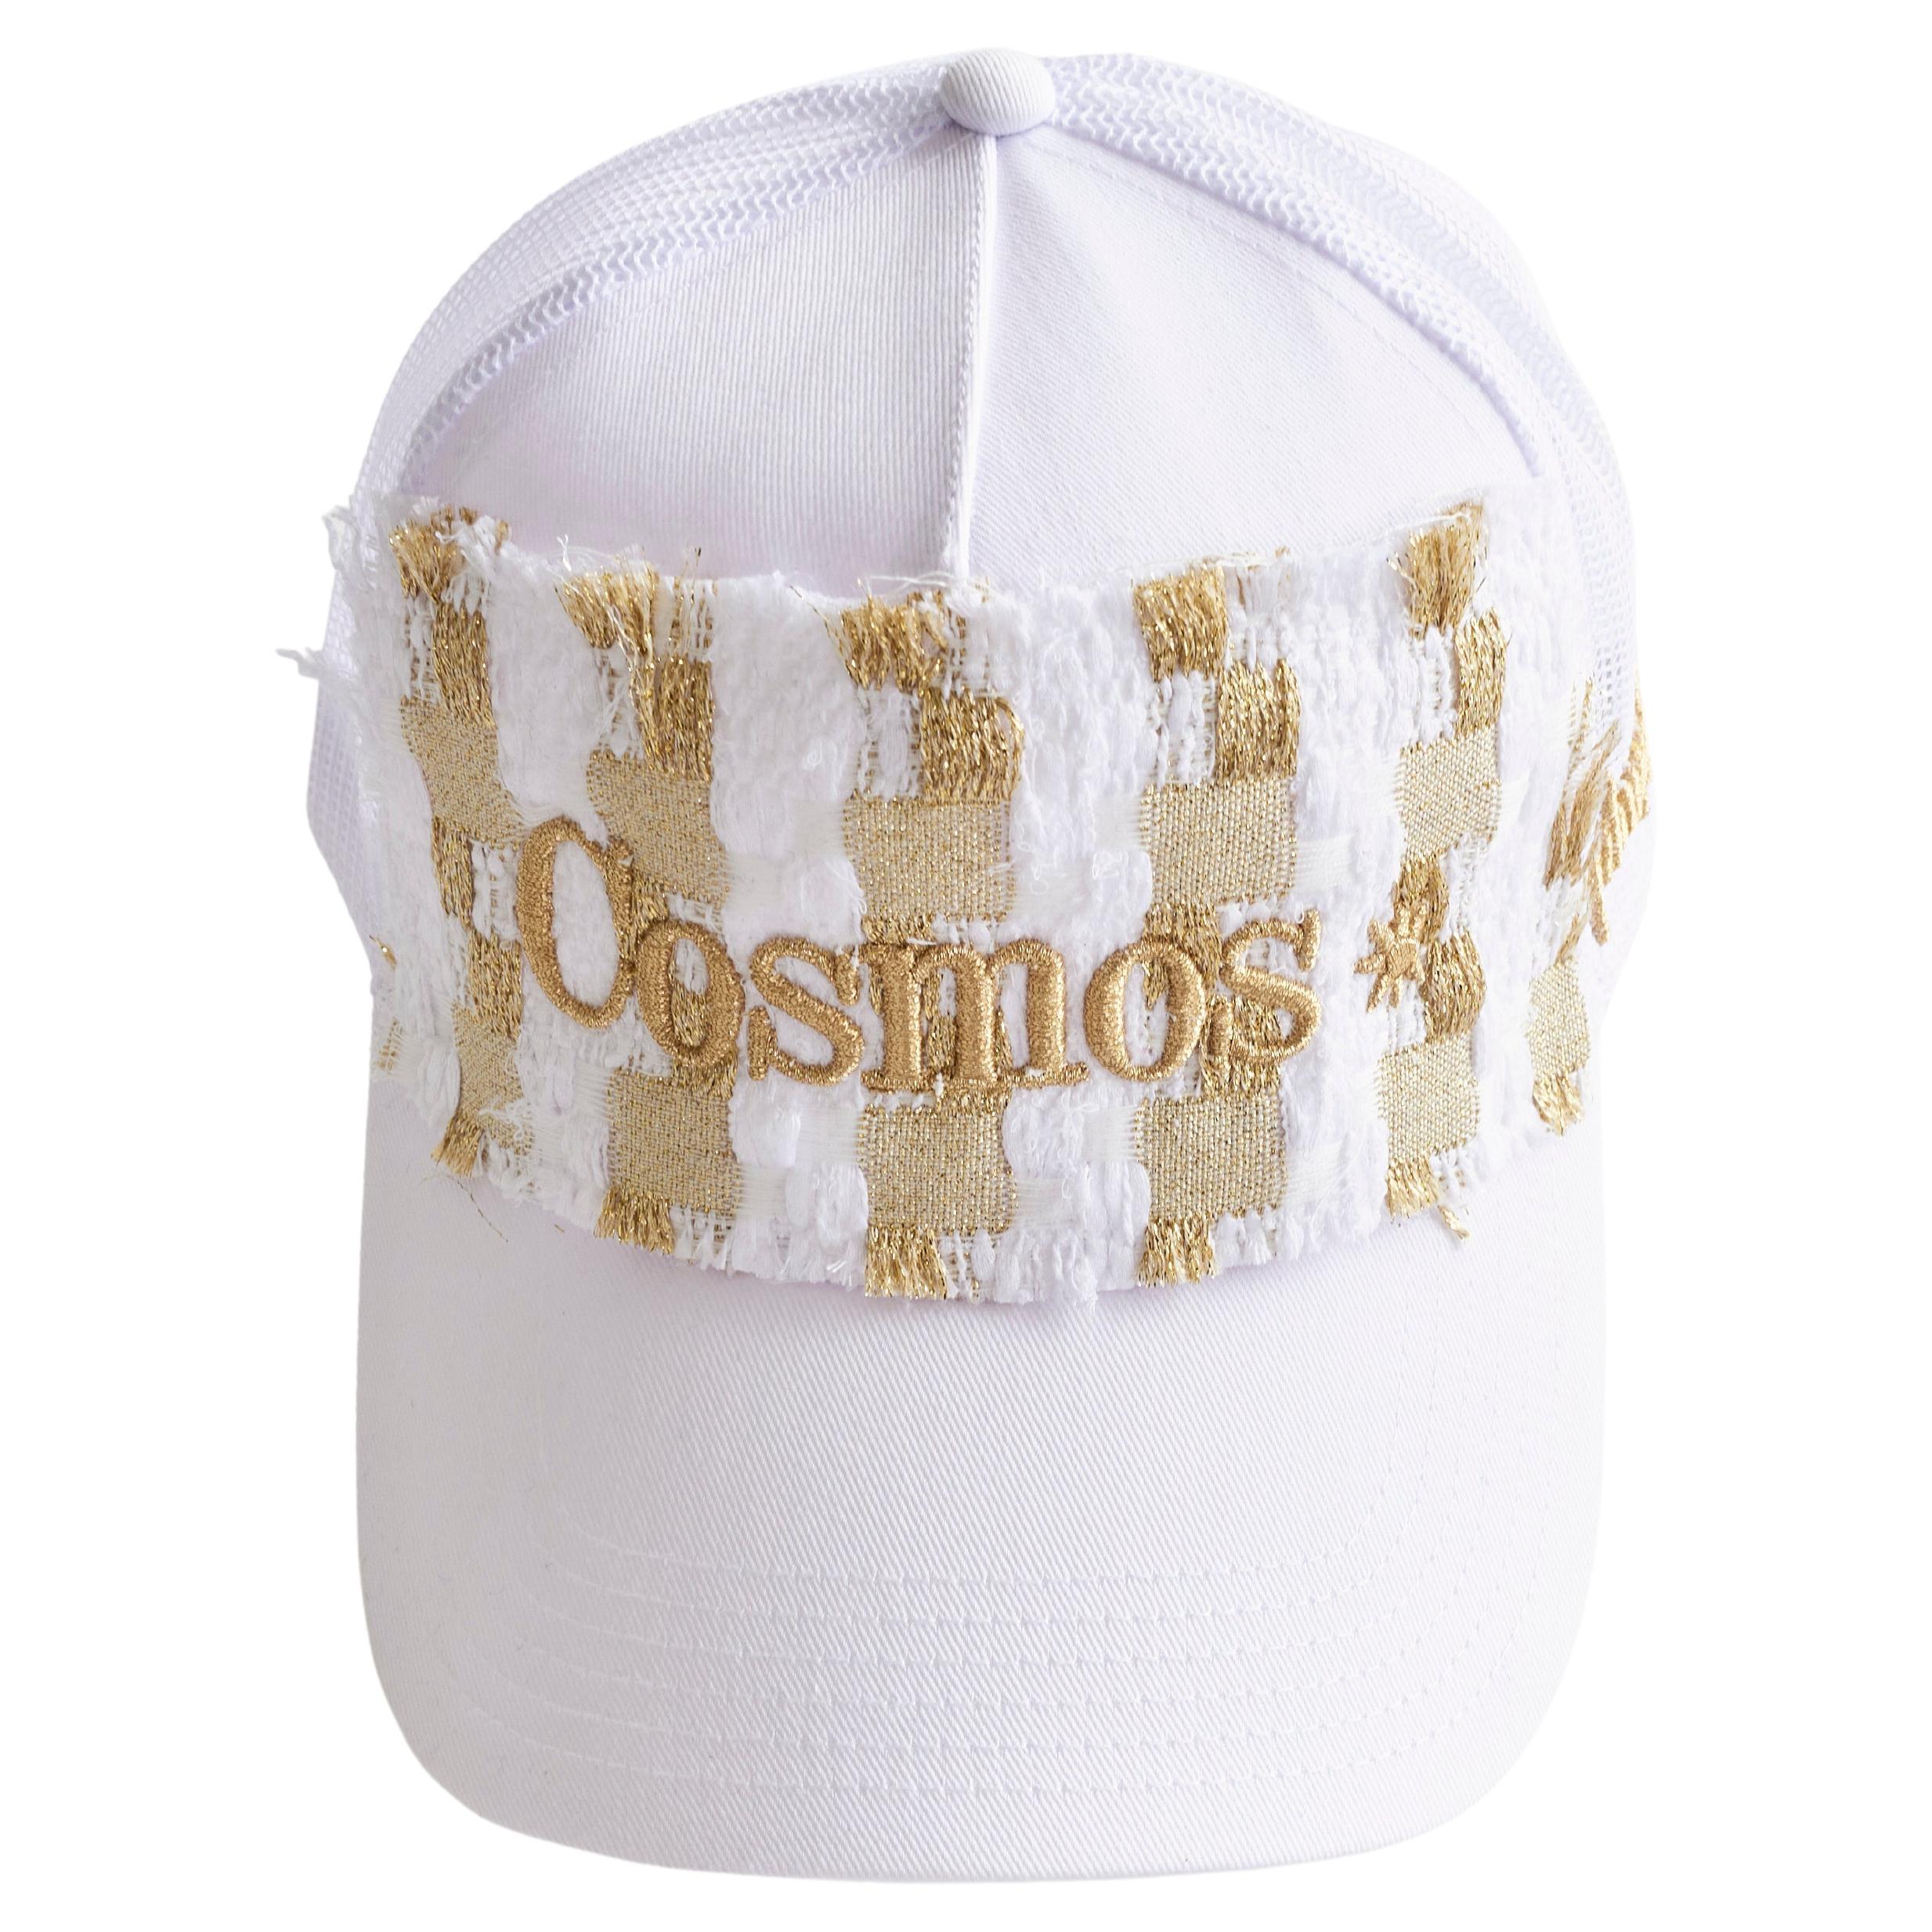 Brand: J Dauphin
White Cosmos Gold White Lurex Tweed Trucker Hat 

Embroidery Made in LA

Express a hybrid of easy-luxe and bourgeoisie jet-set look. Effortless and versatile, elegant and classy they bring an allure of unexpected outside-the-box